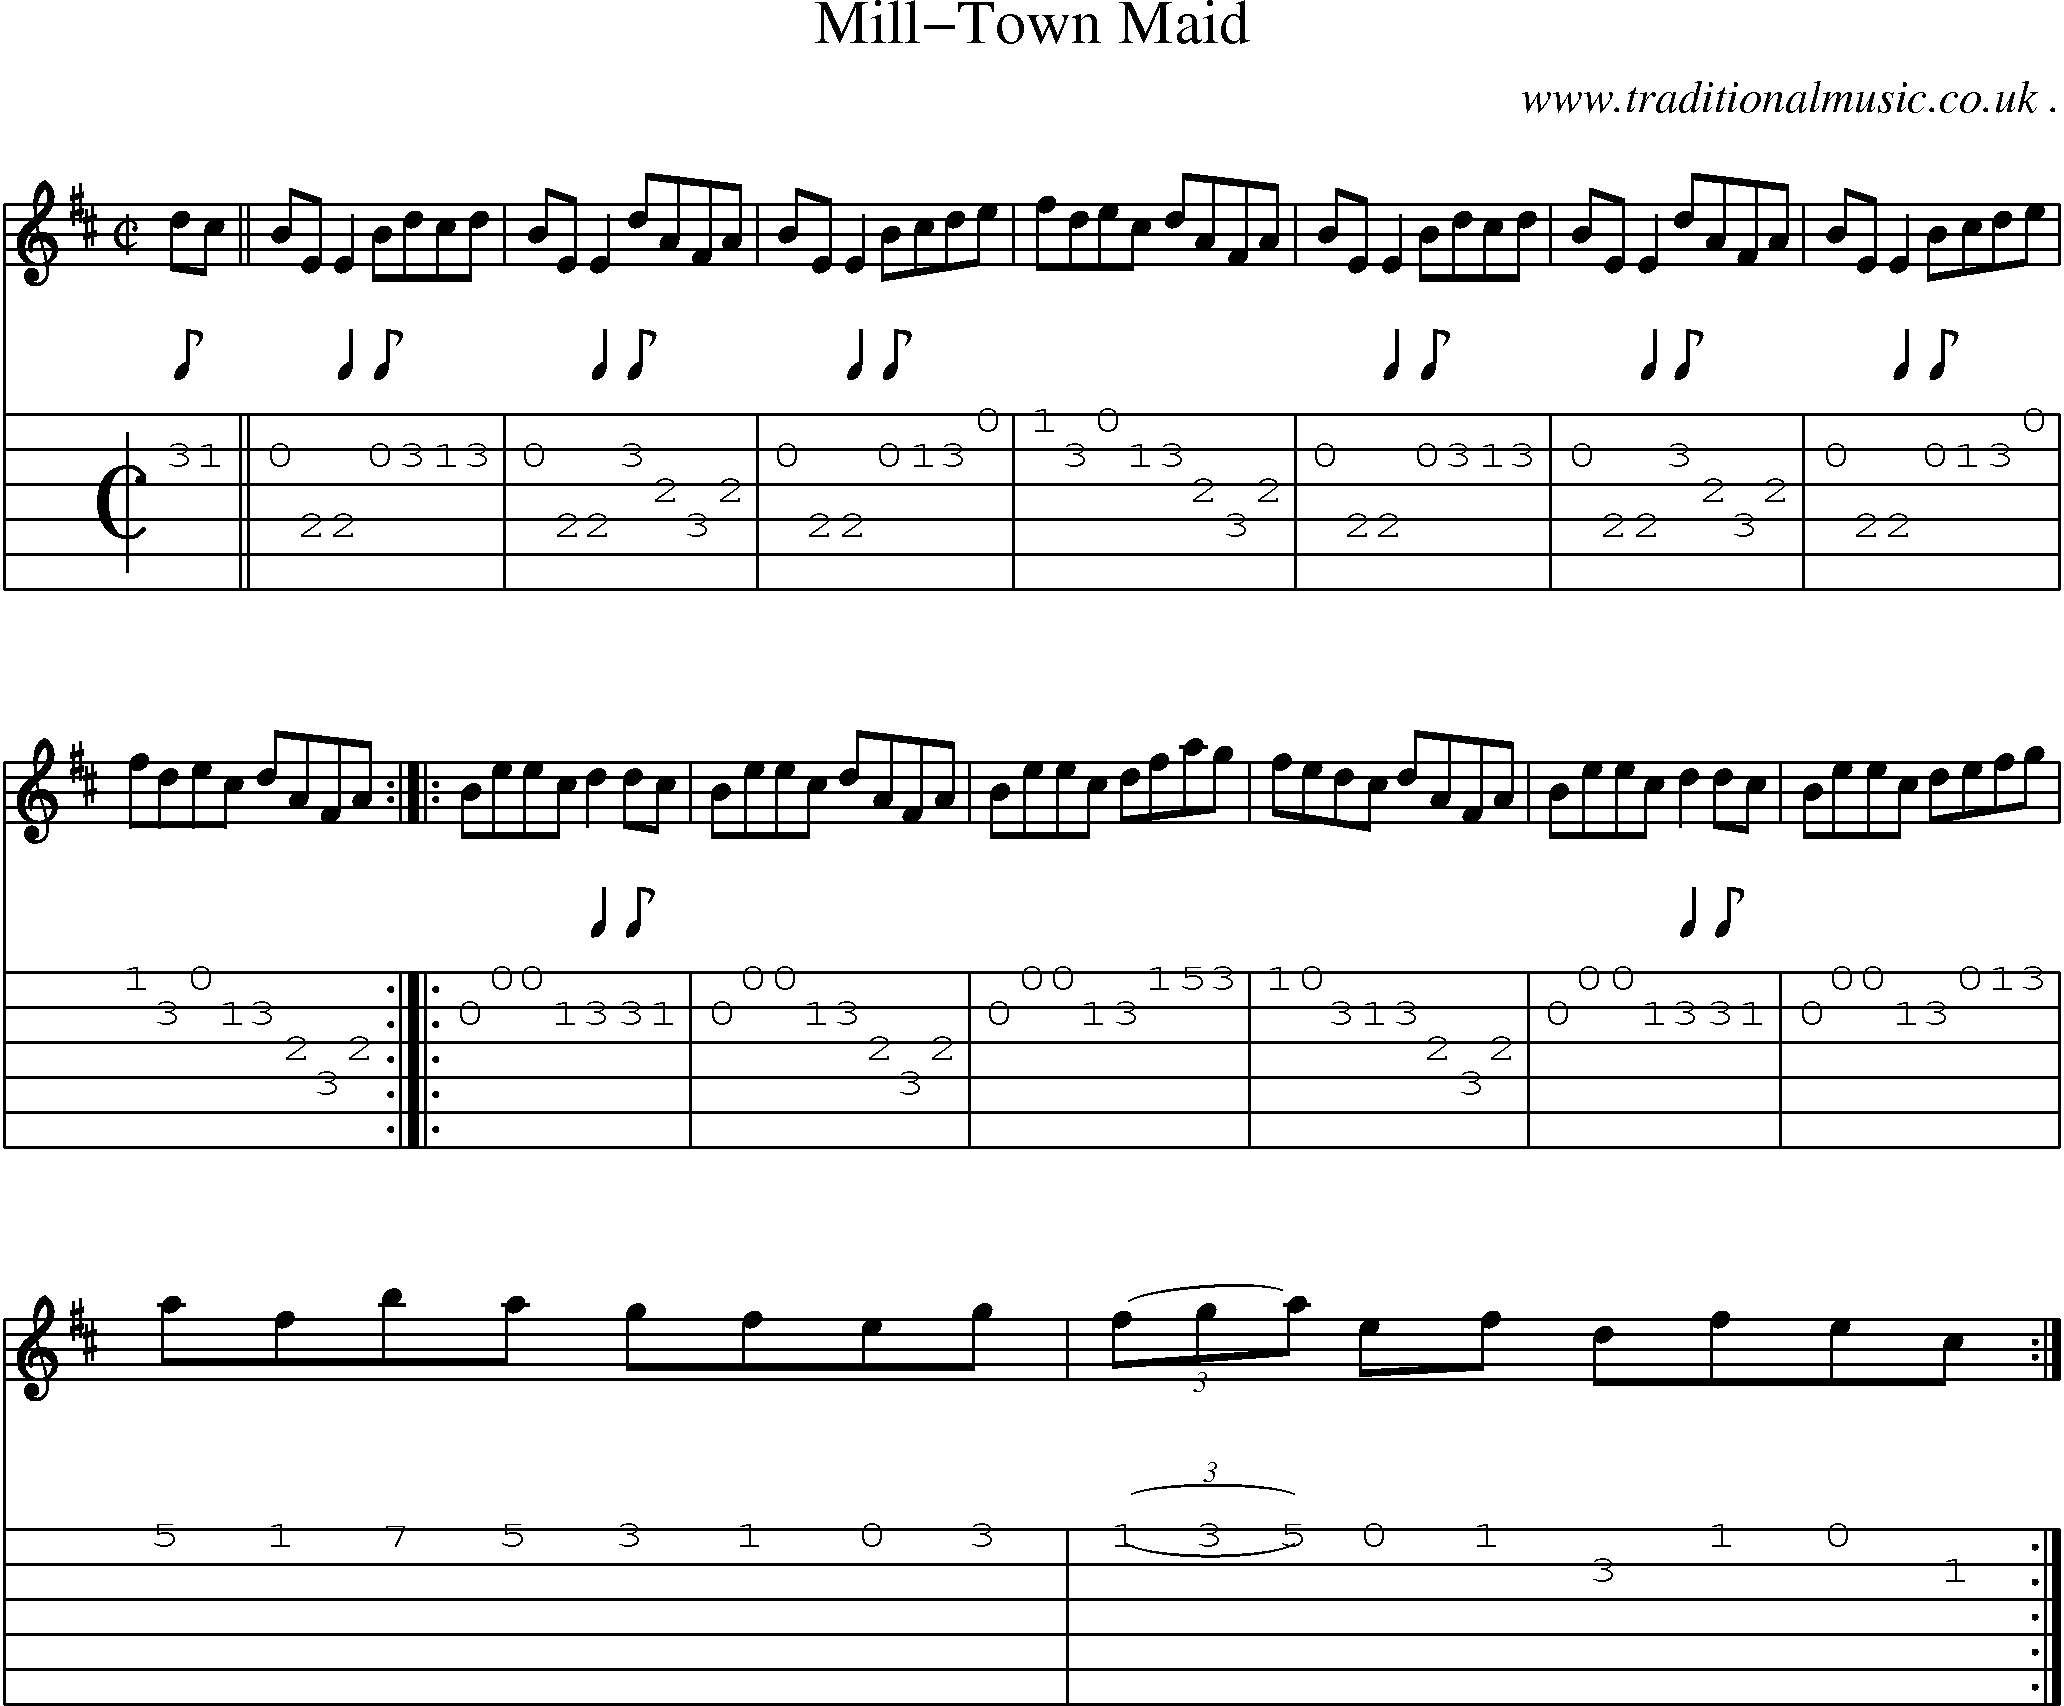 Sheet-Music and Guitar Tabs for Mill-town Maid